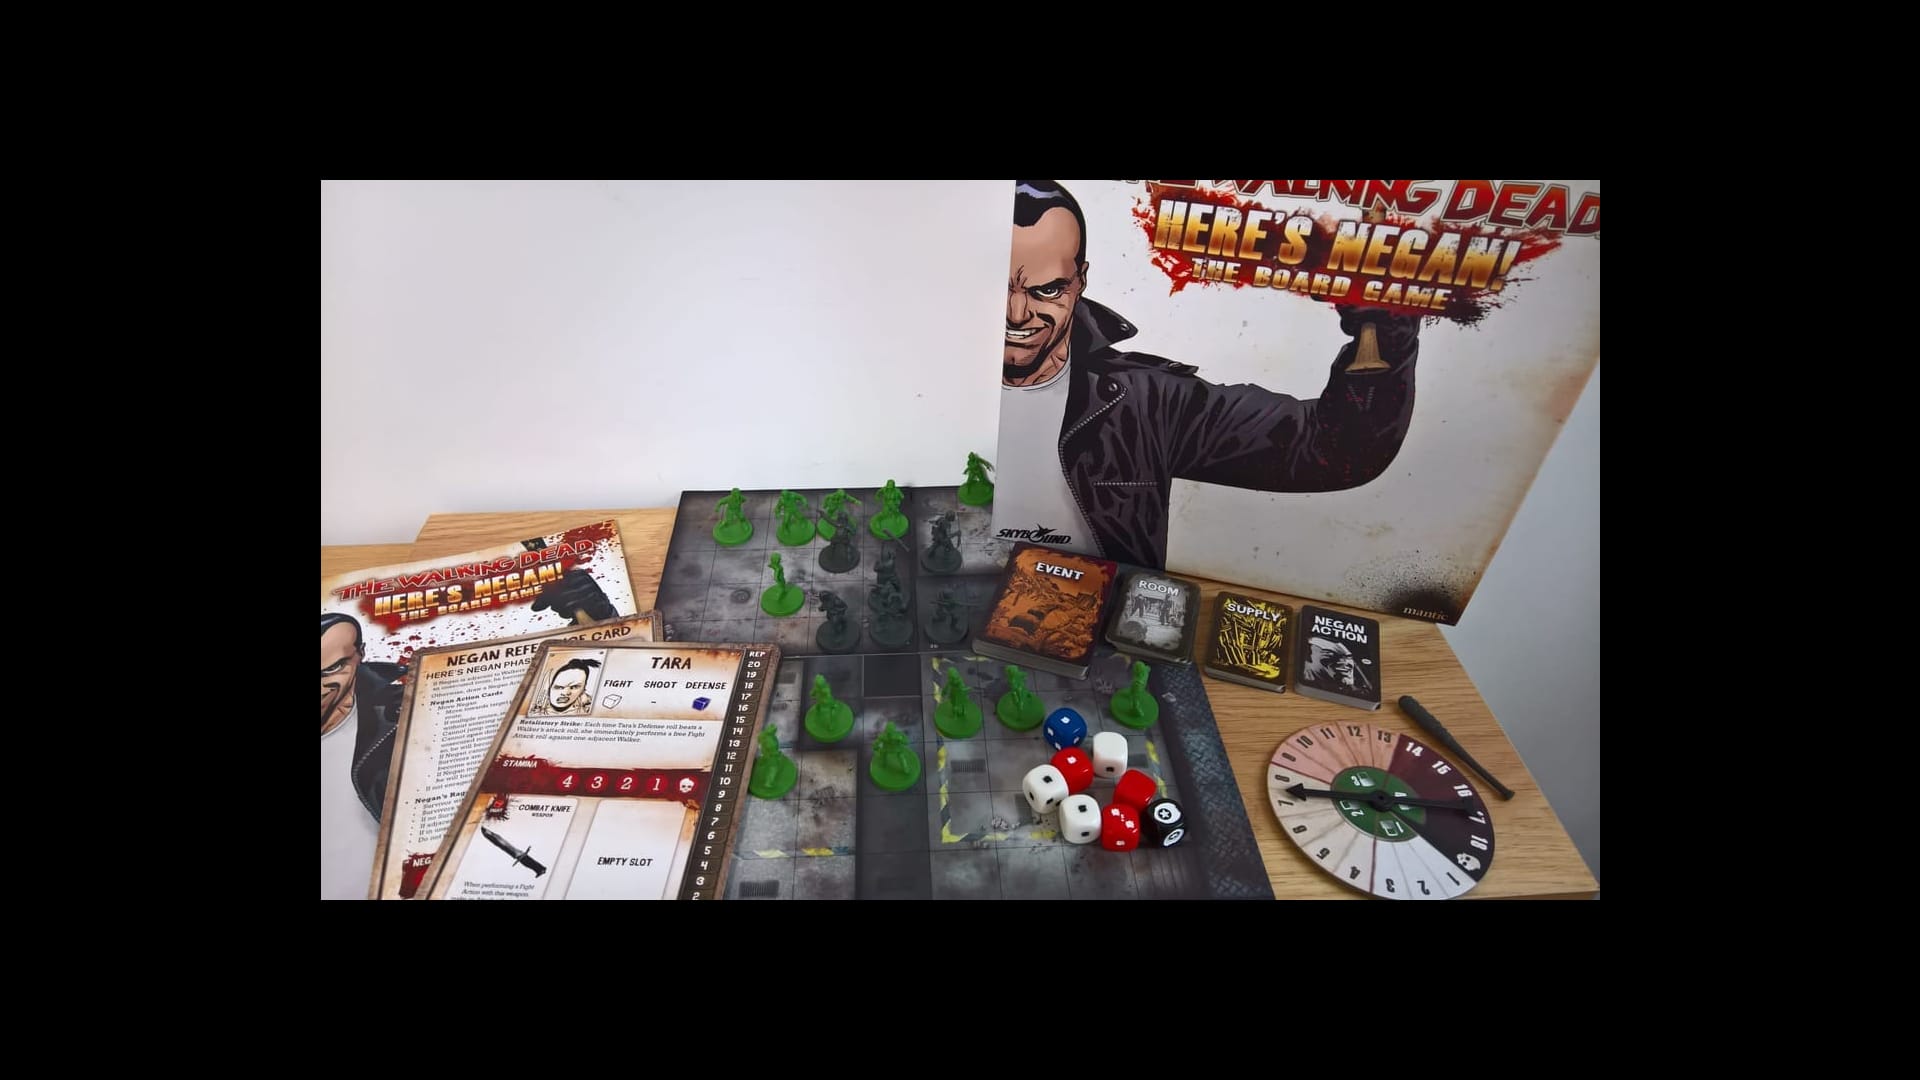 On The Tabletop Here's Negan - The Walking Dead Board Game 